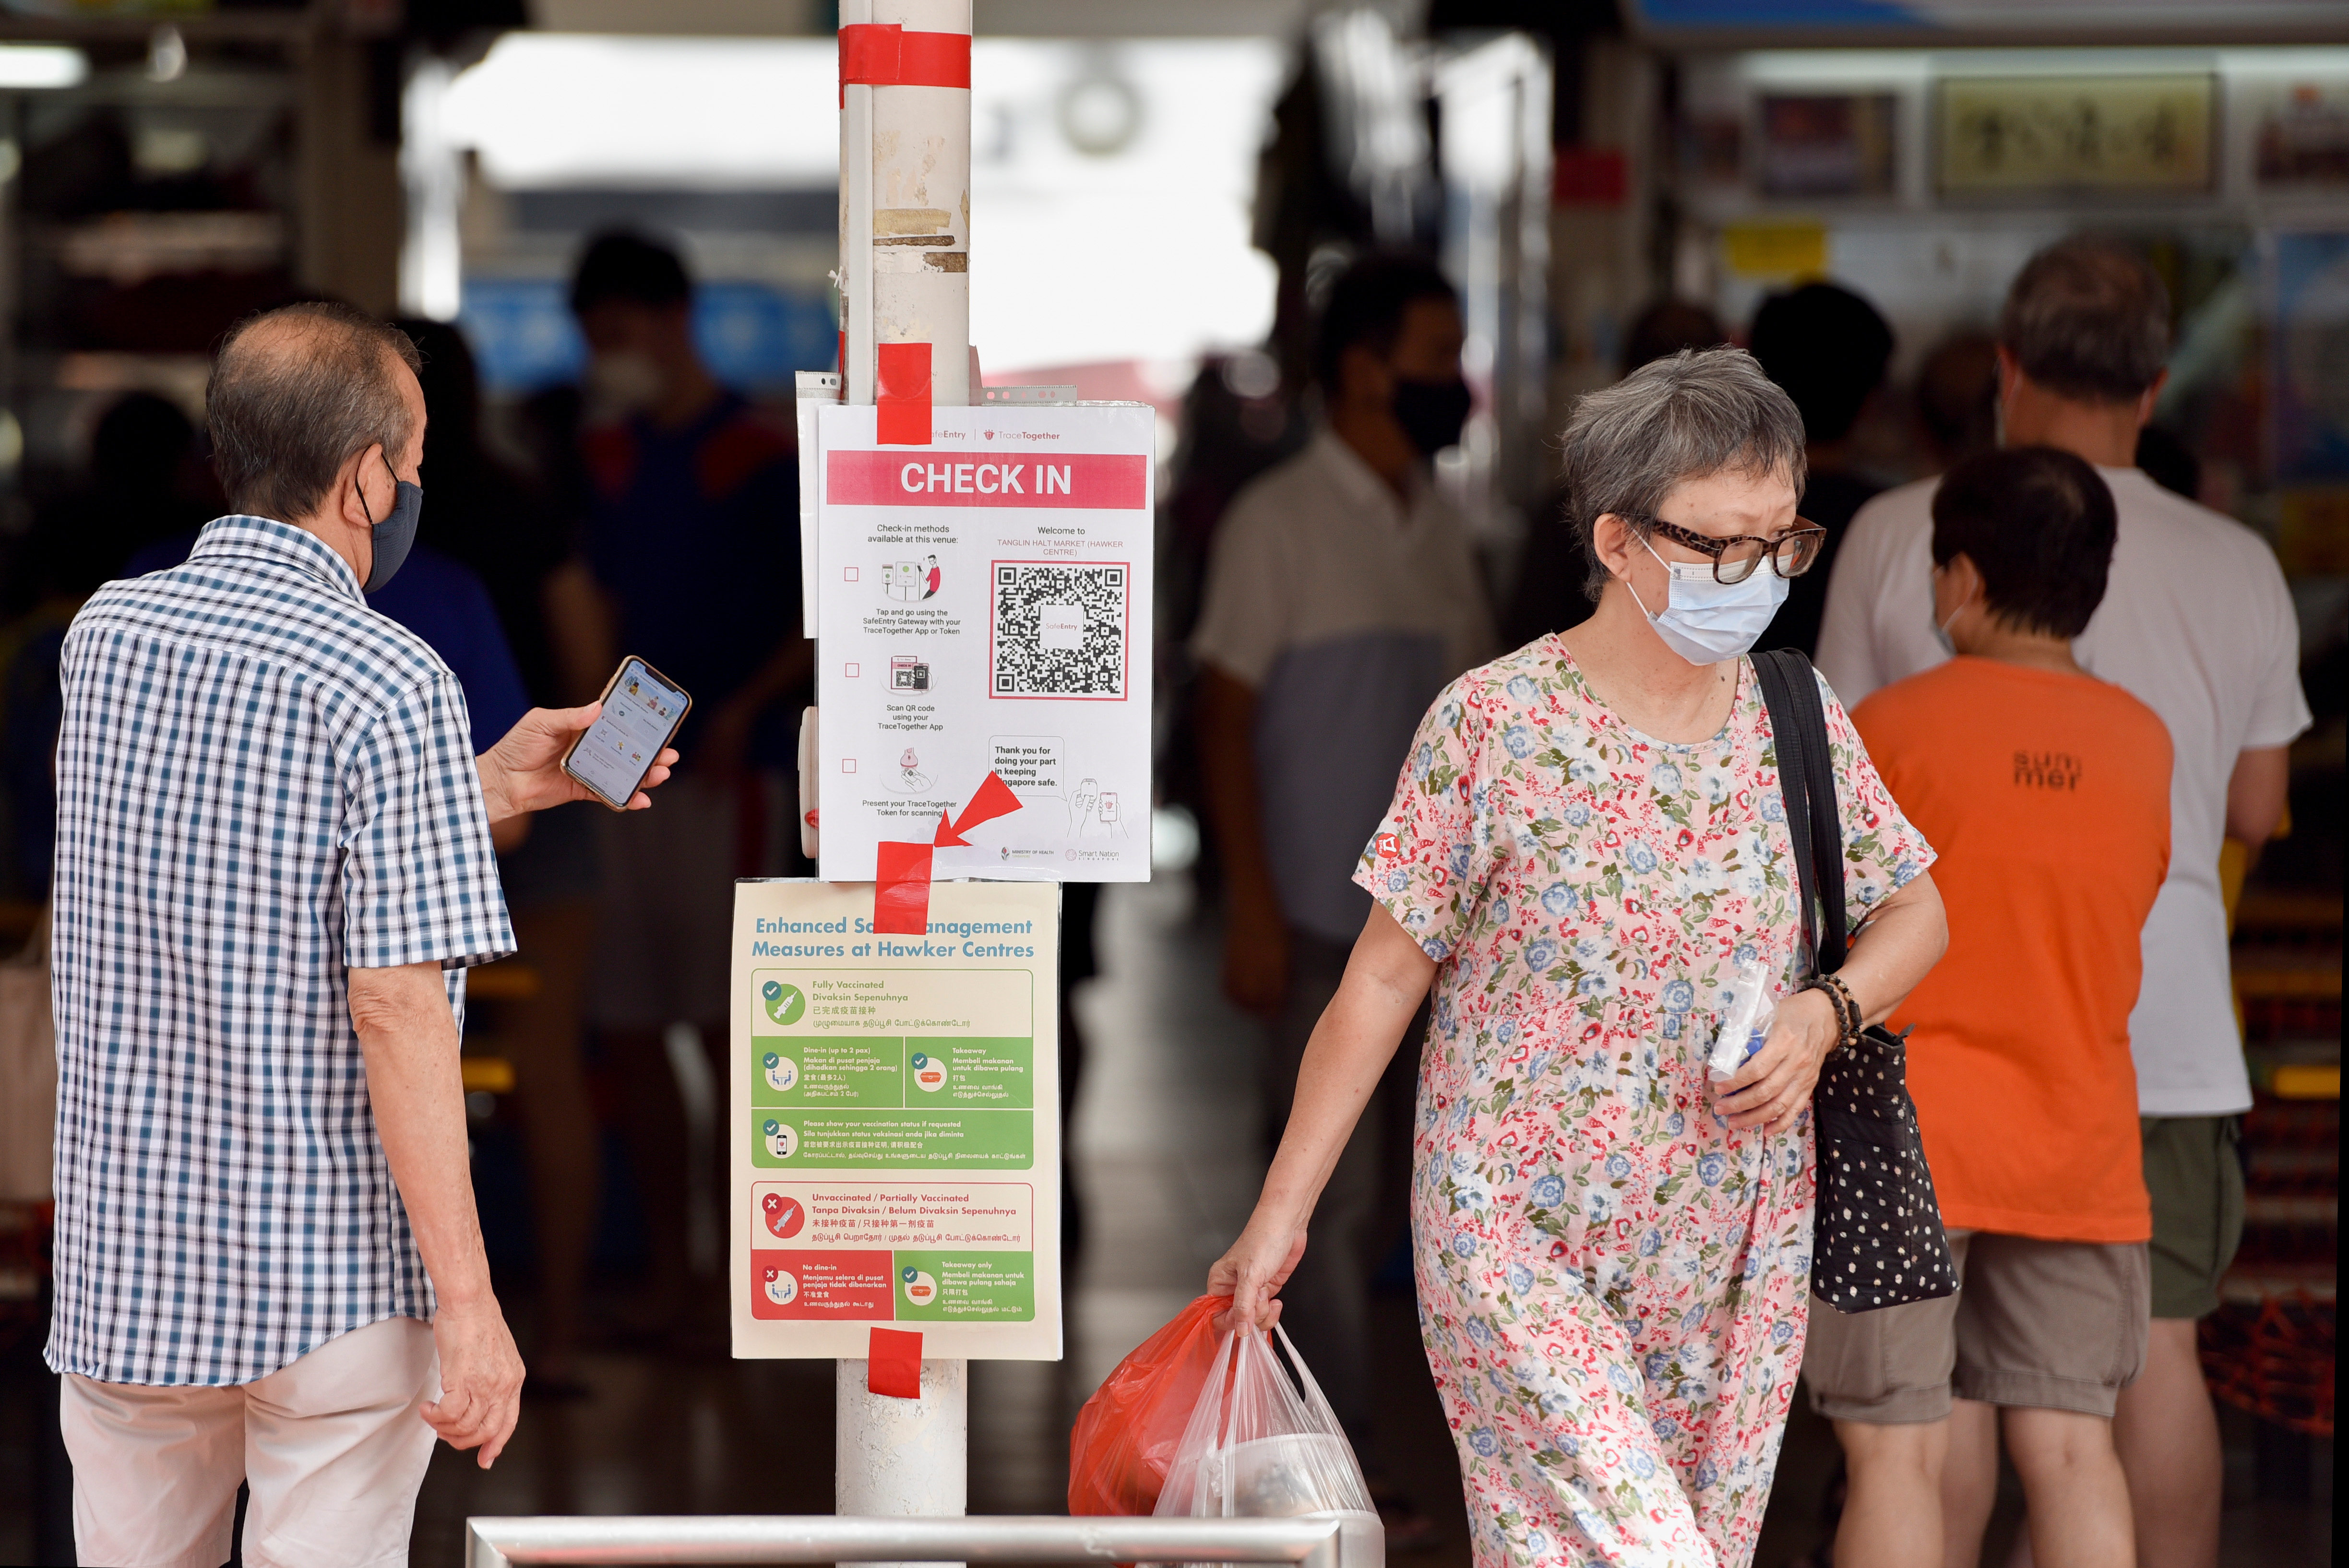 People entering a food centre check-in with their phones before they are allowed to dine-in, amidst the coronavirus disease (COVID-19) pandemic, in Singapore November 3, 2021. REUTERS/Caroline Chia